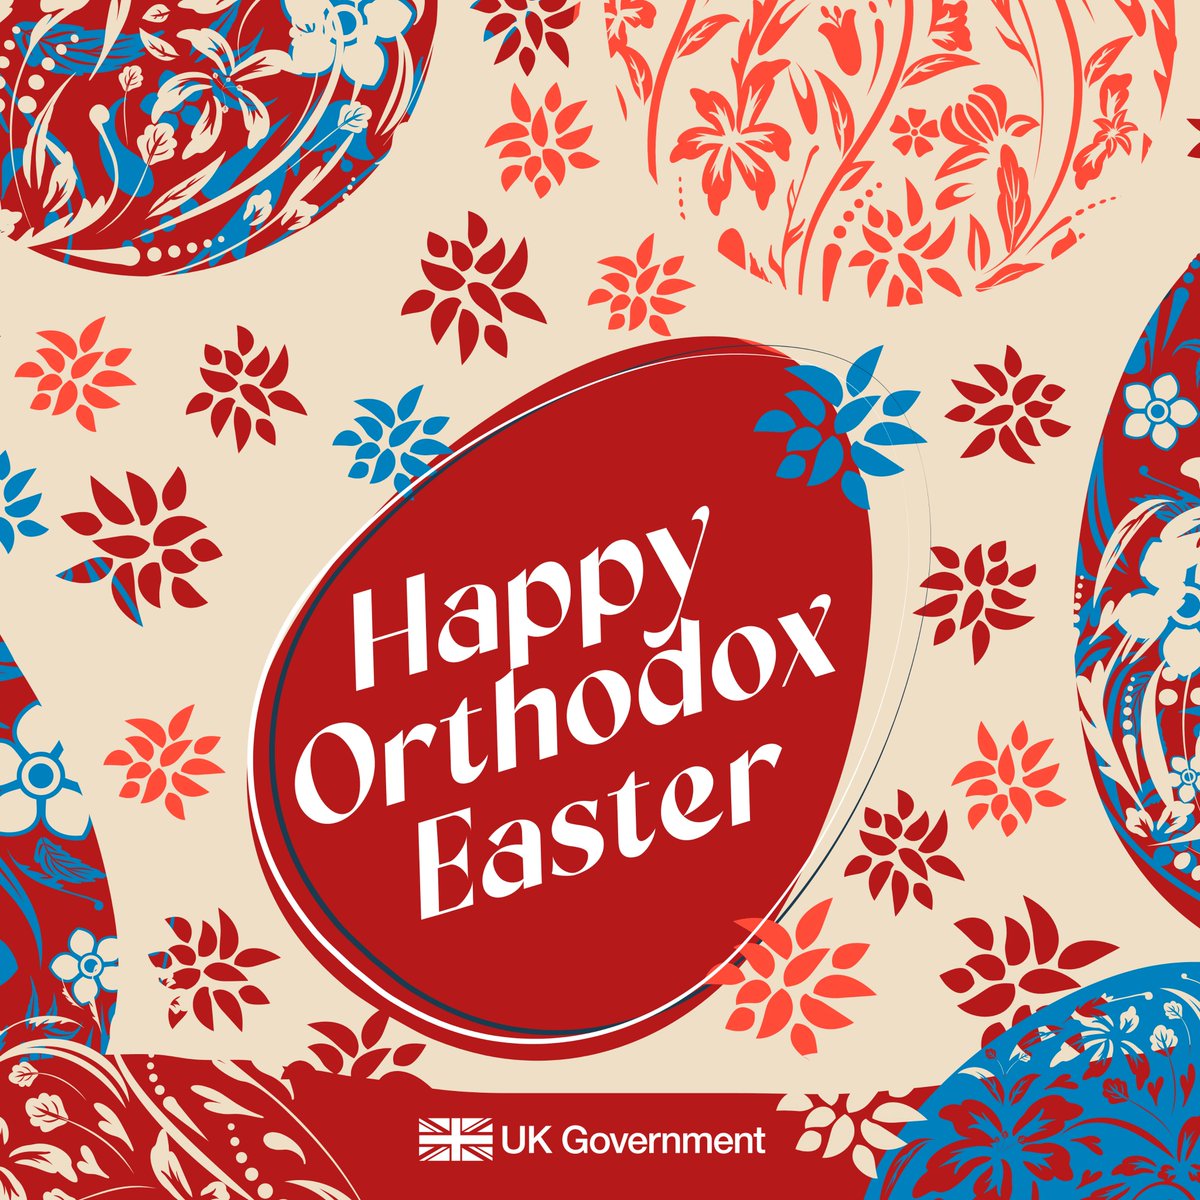 Happy Orthodox Easter to all who celebrate across the world. #OrthodoxEaster